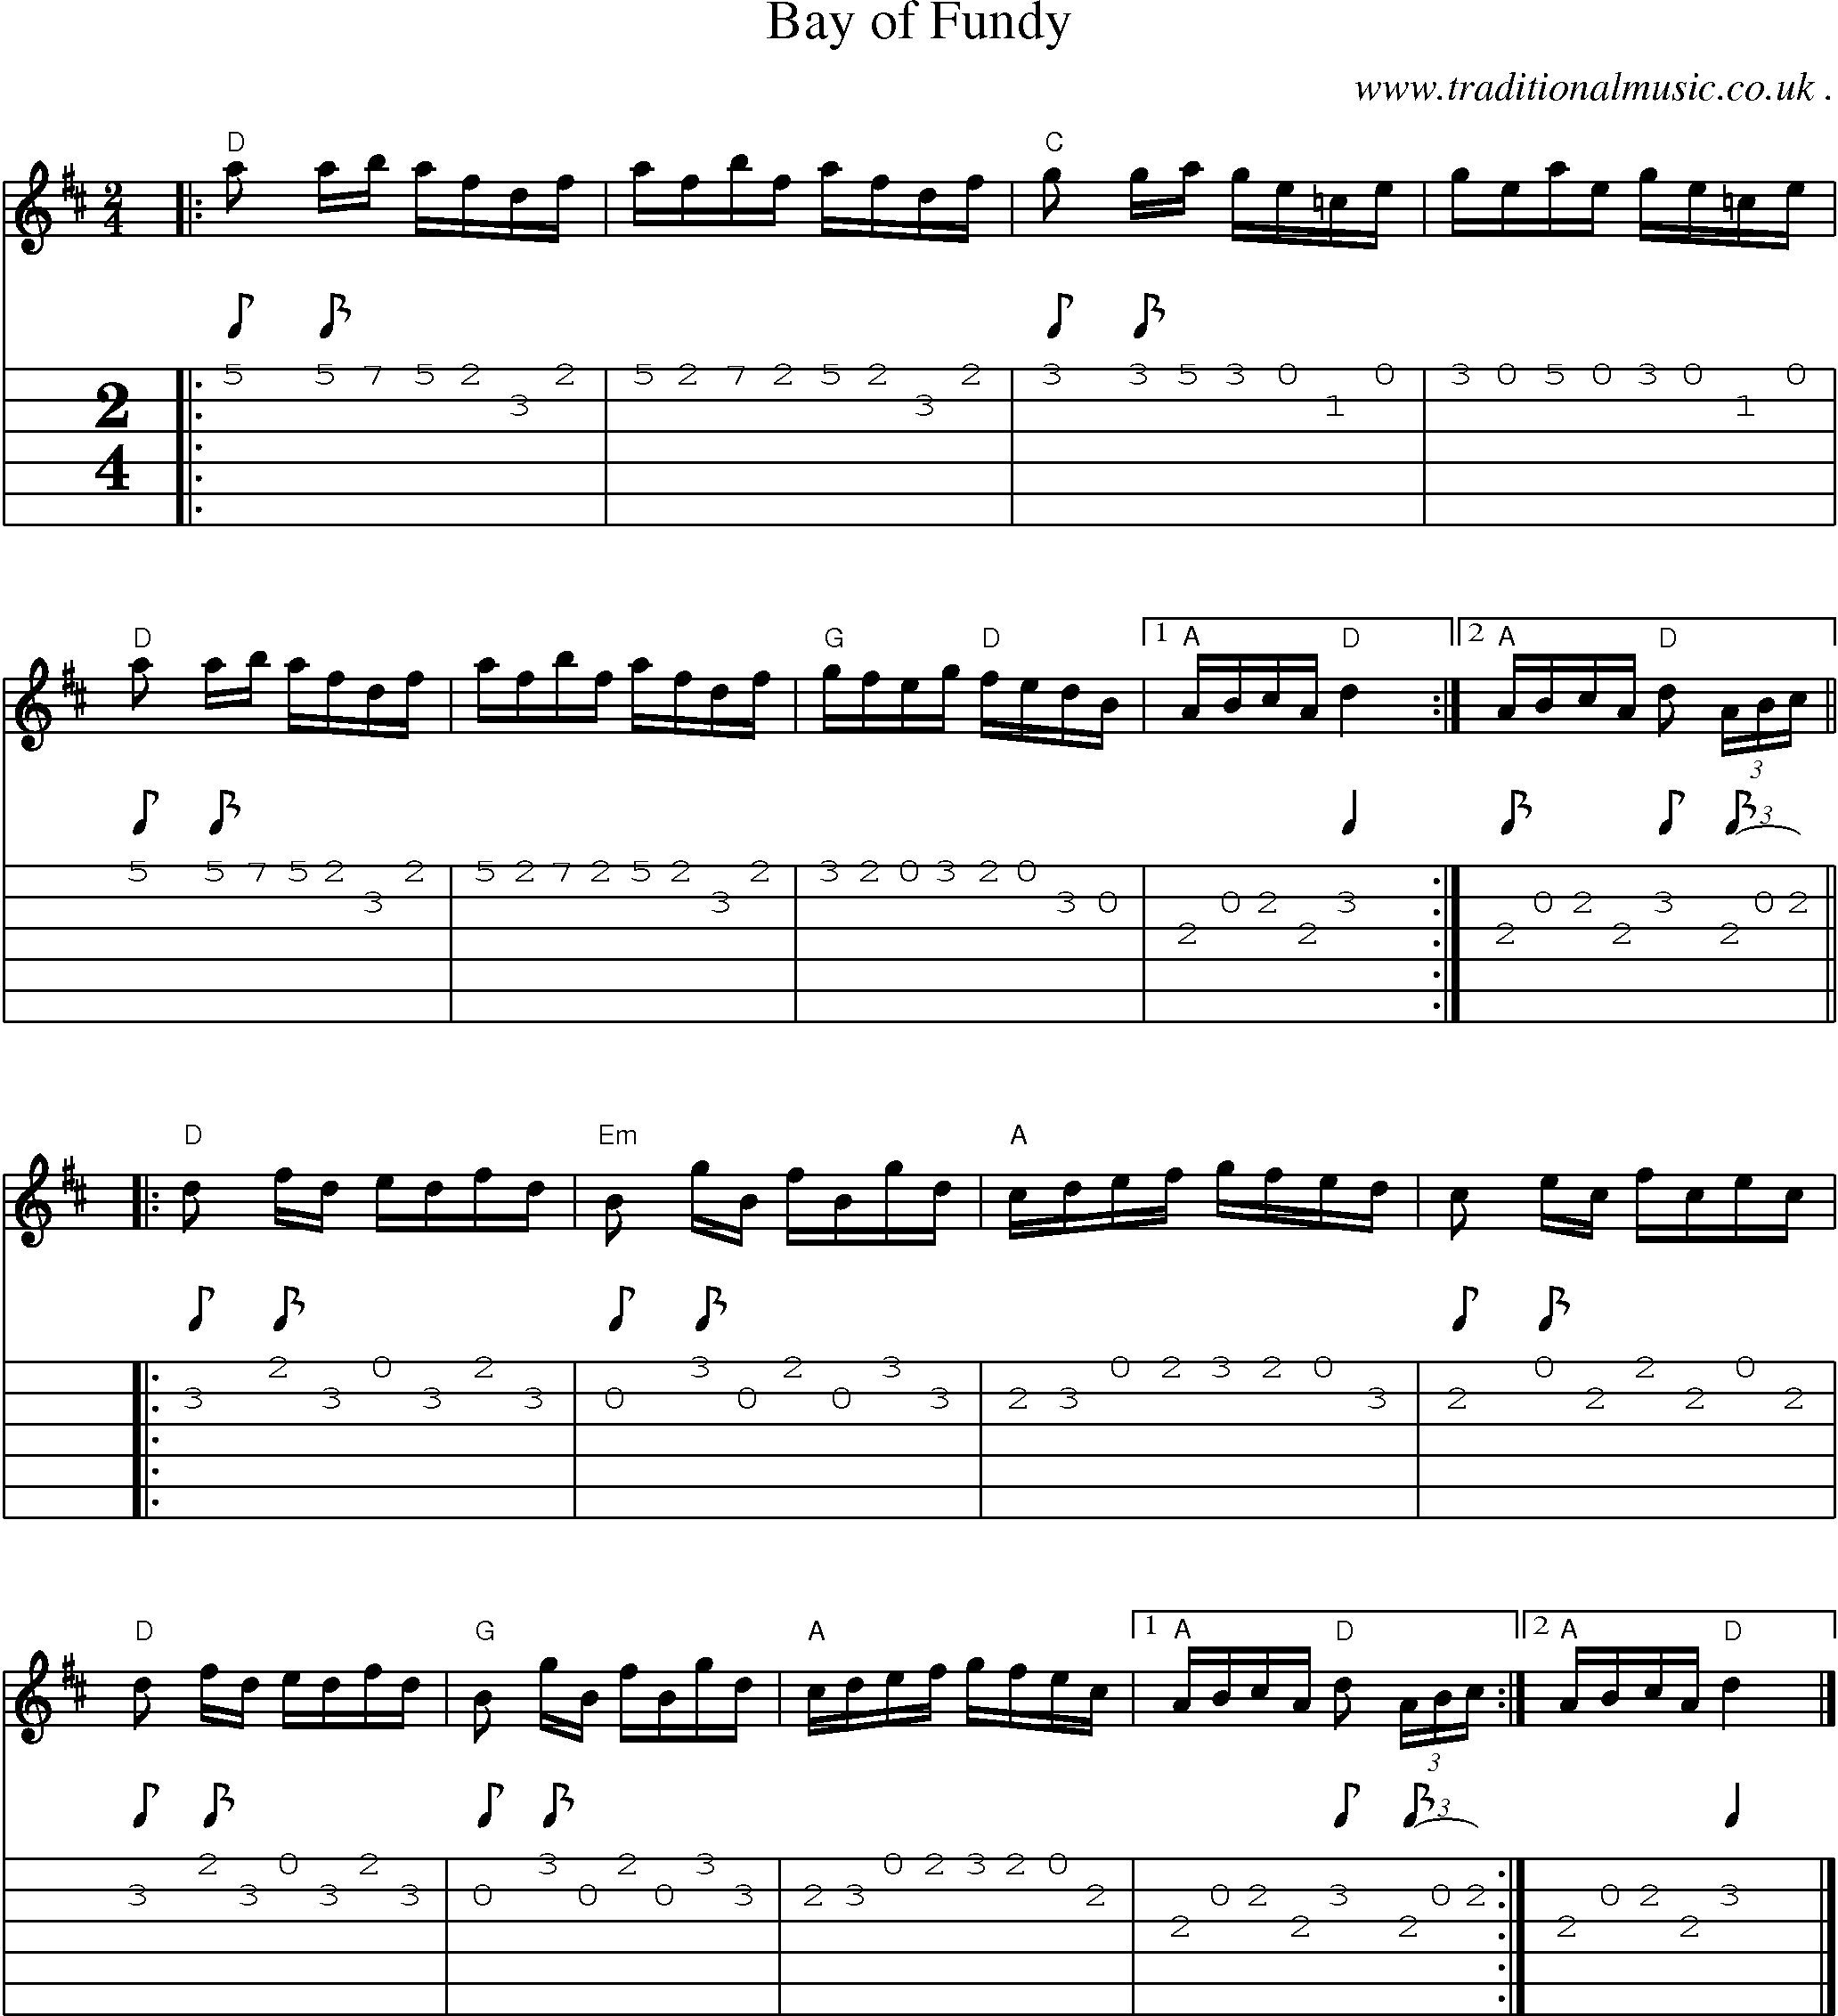 Music Score and Guitar Tabs for Bay Of Fundy